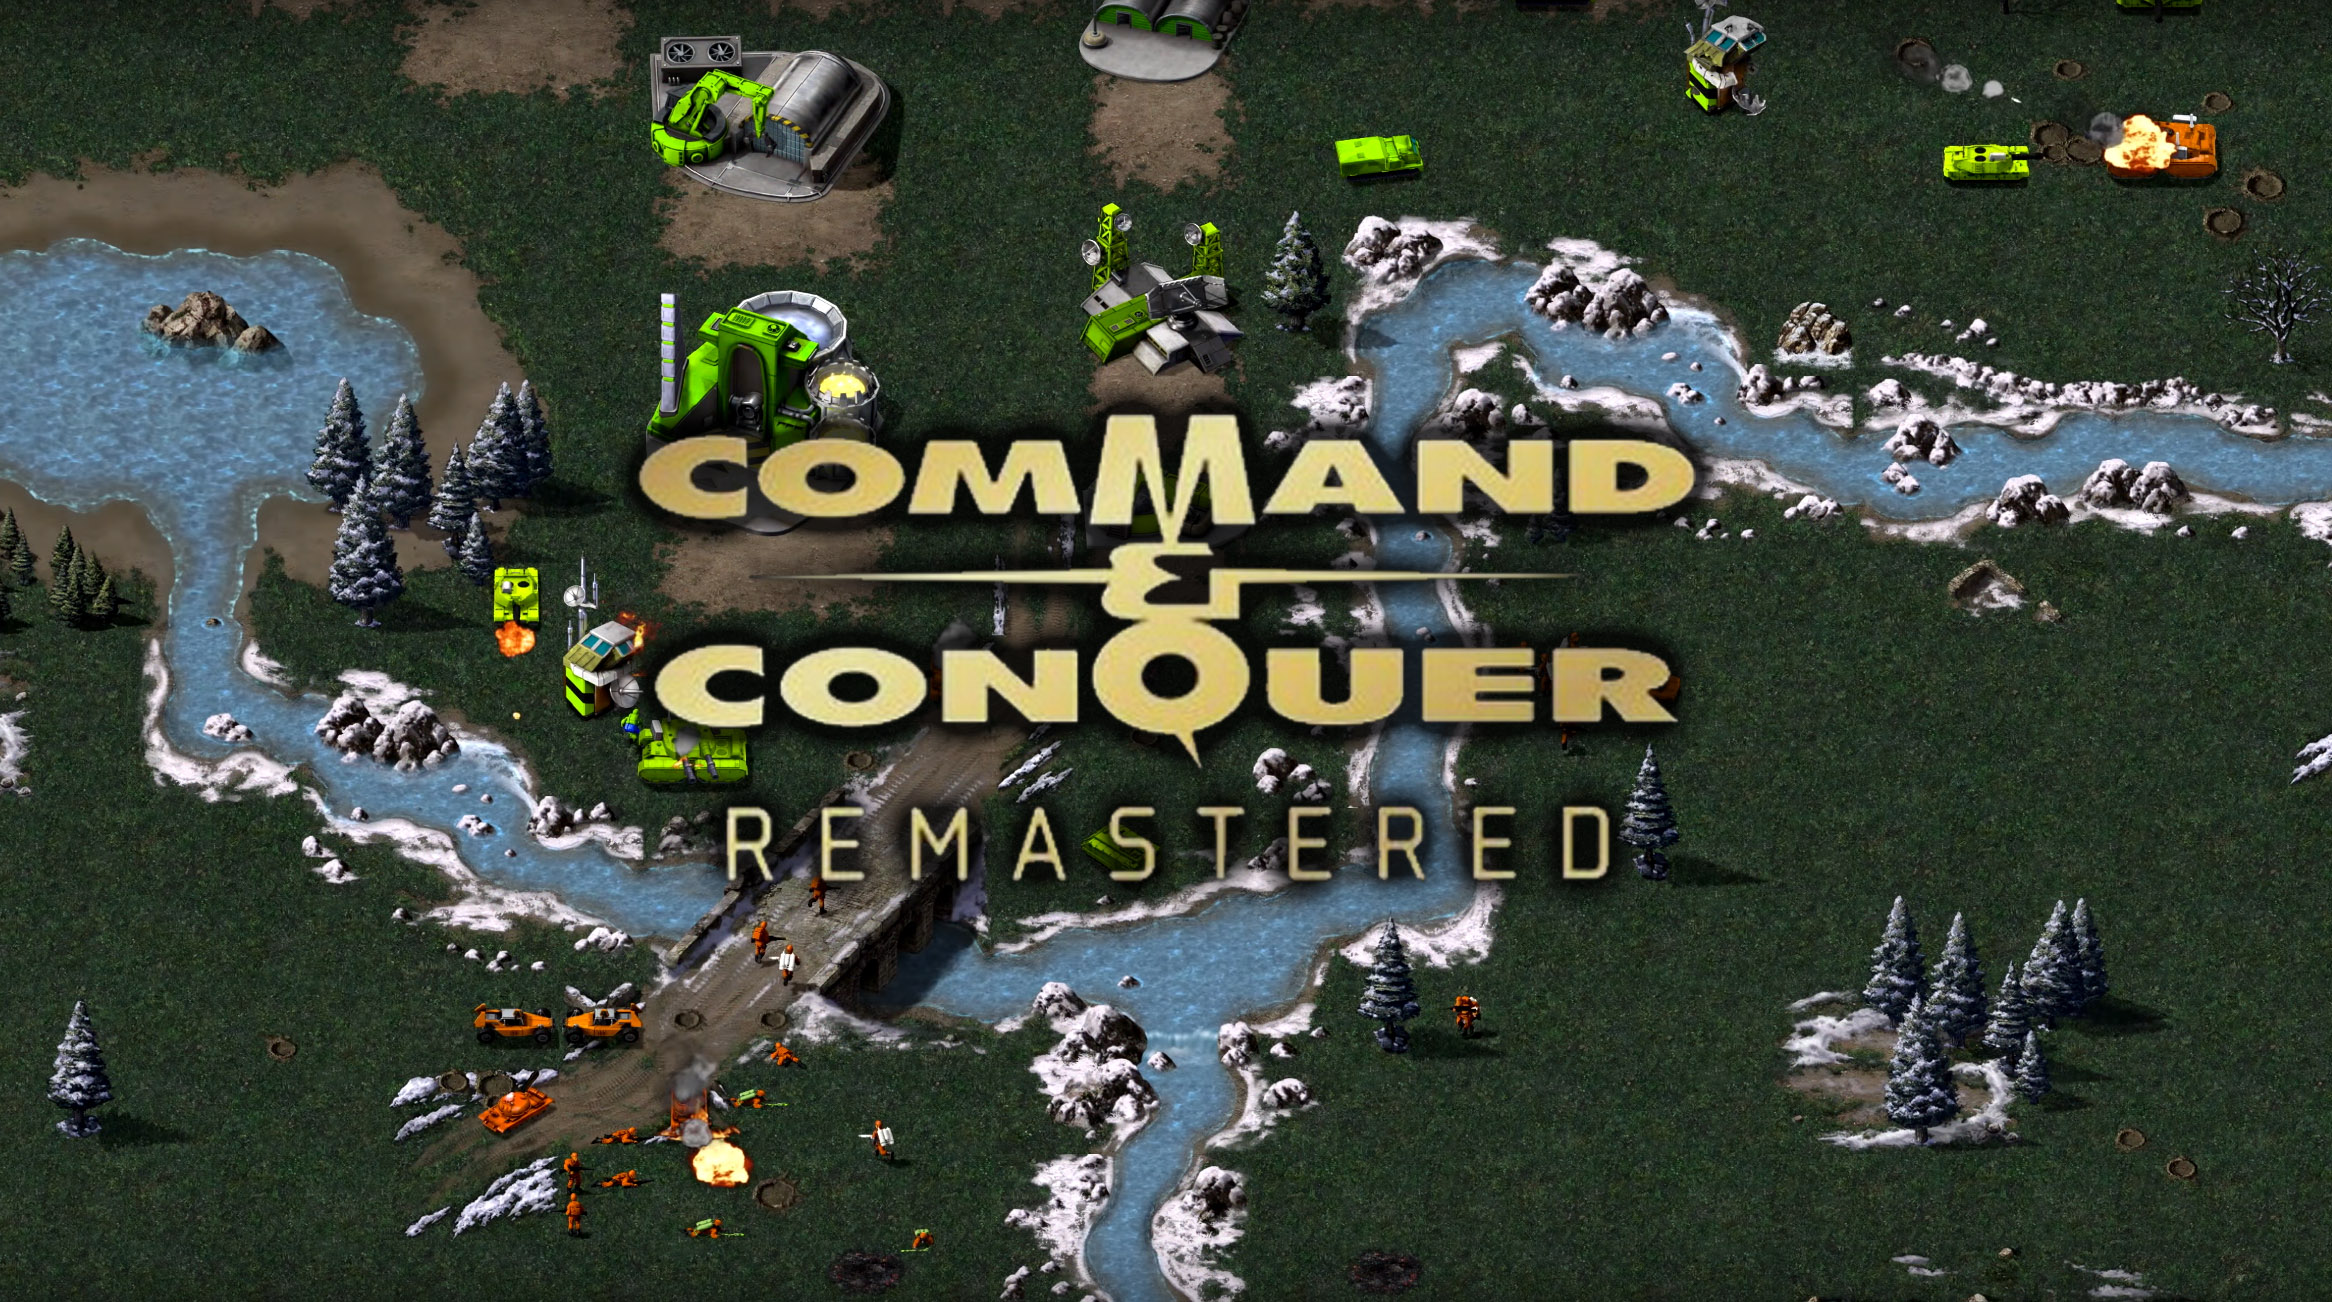 Command and conquer remastered. Commander Conquer Remastered. C C Remastered collection. Command and Conquer Remastered collection Steam.